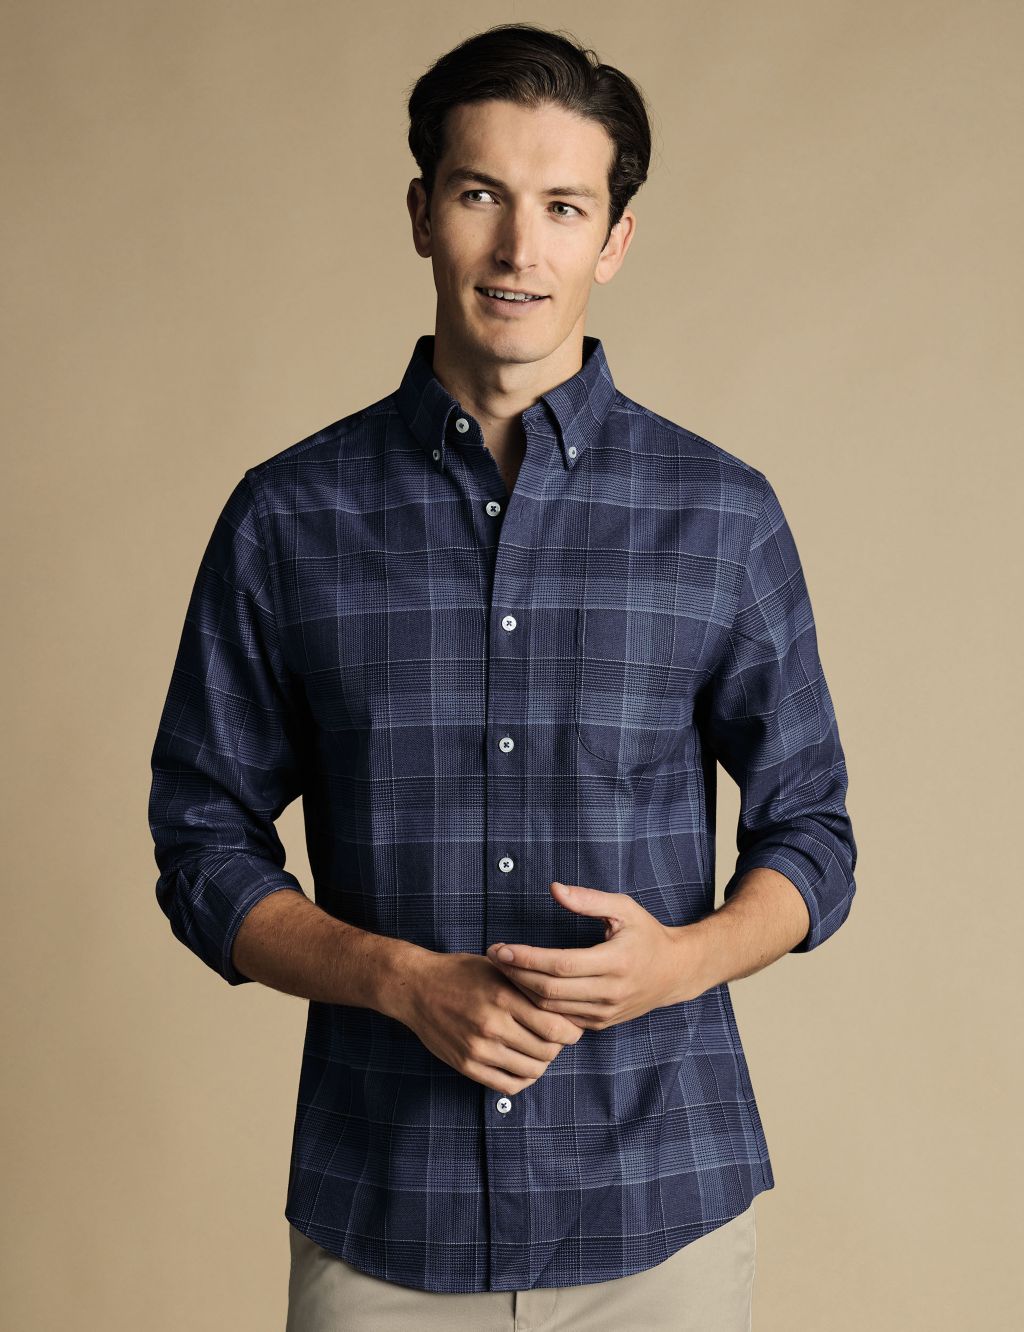 Men’s Slim-Fit Casual Shirts | M&S